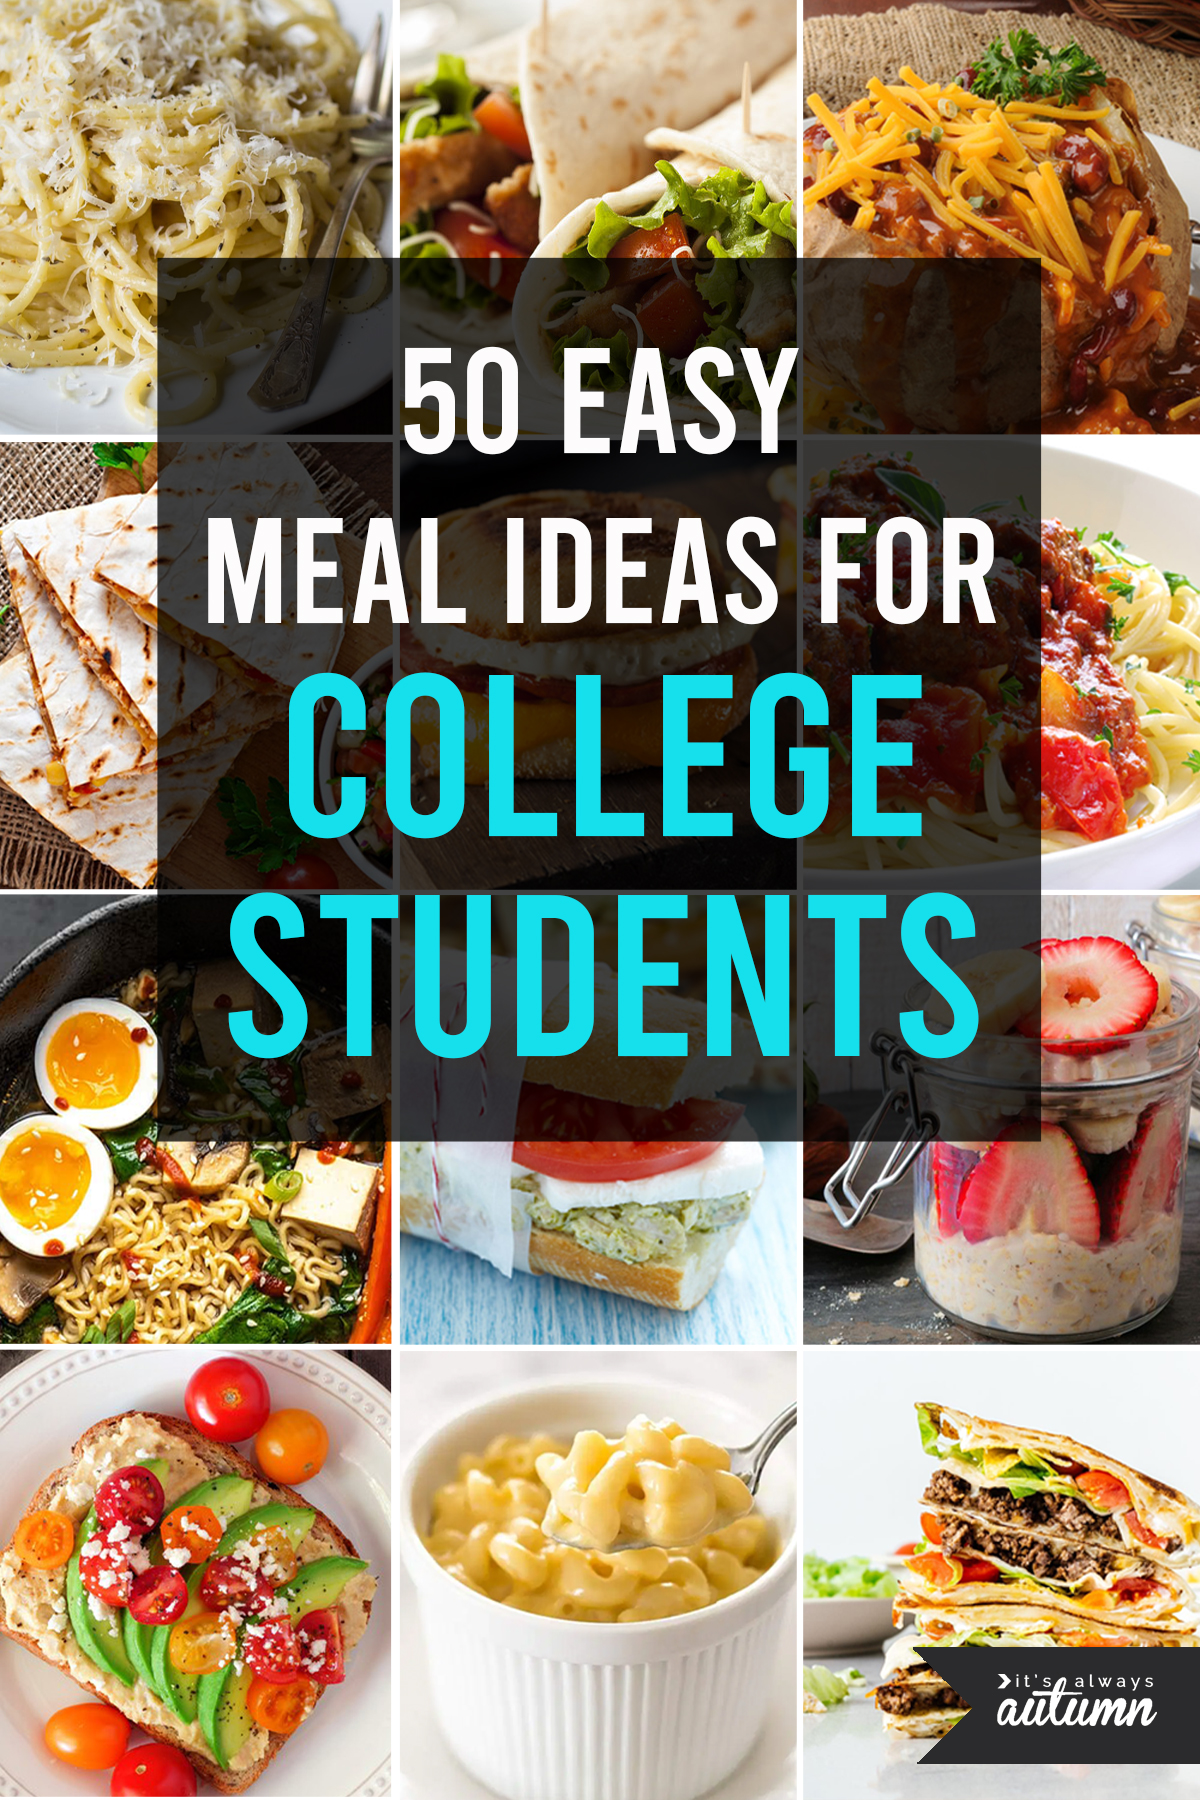 collage of food photos; text: 50 easy meal ideas for college students